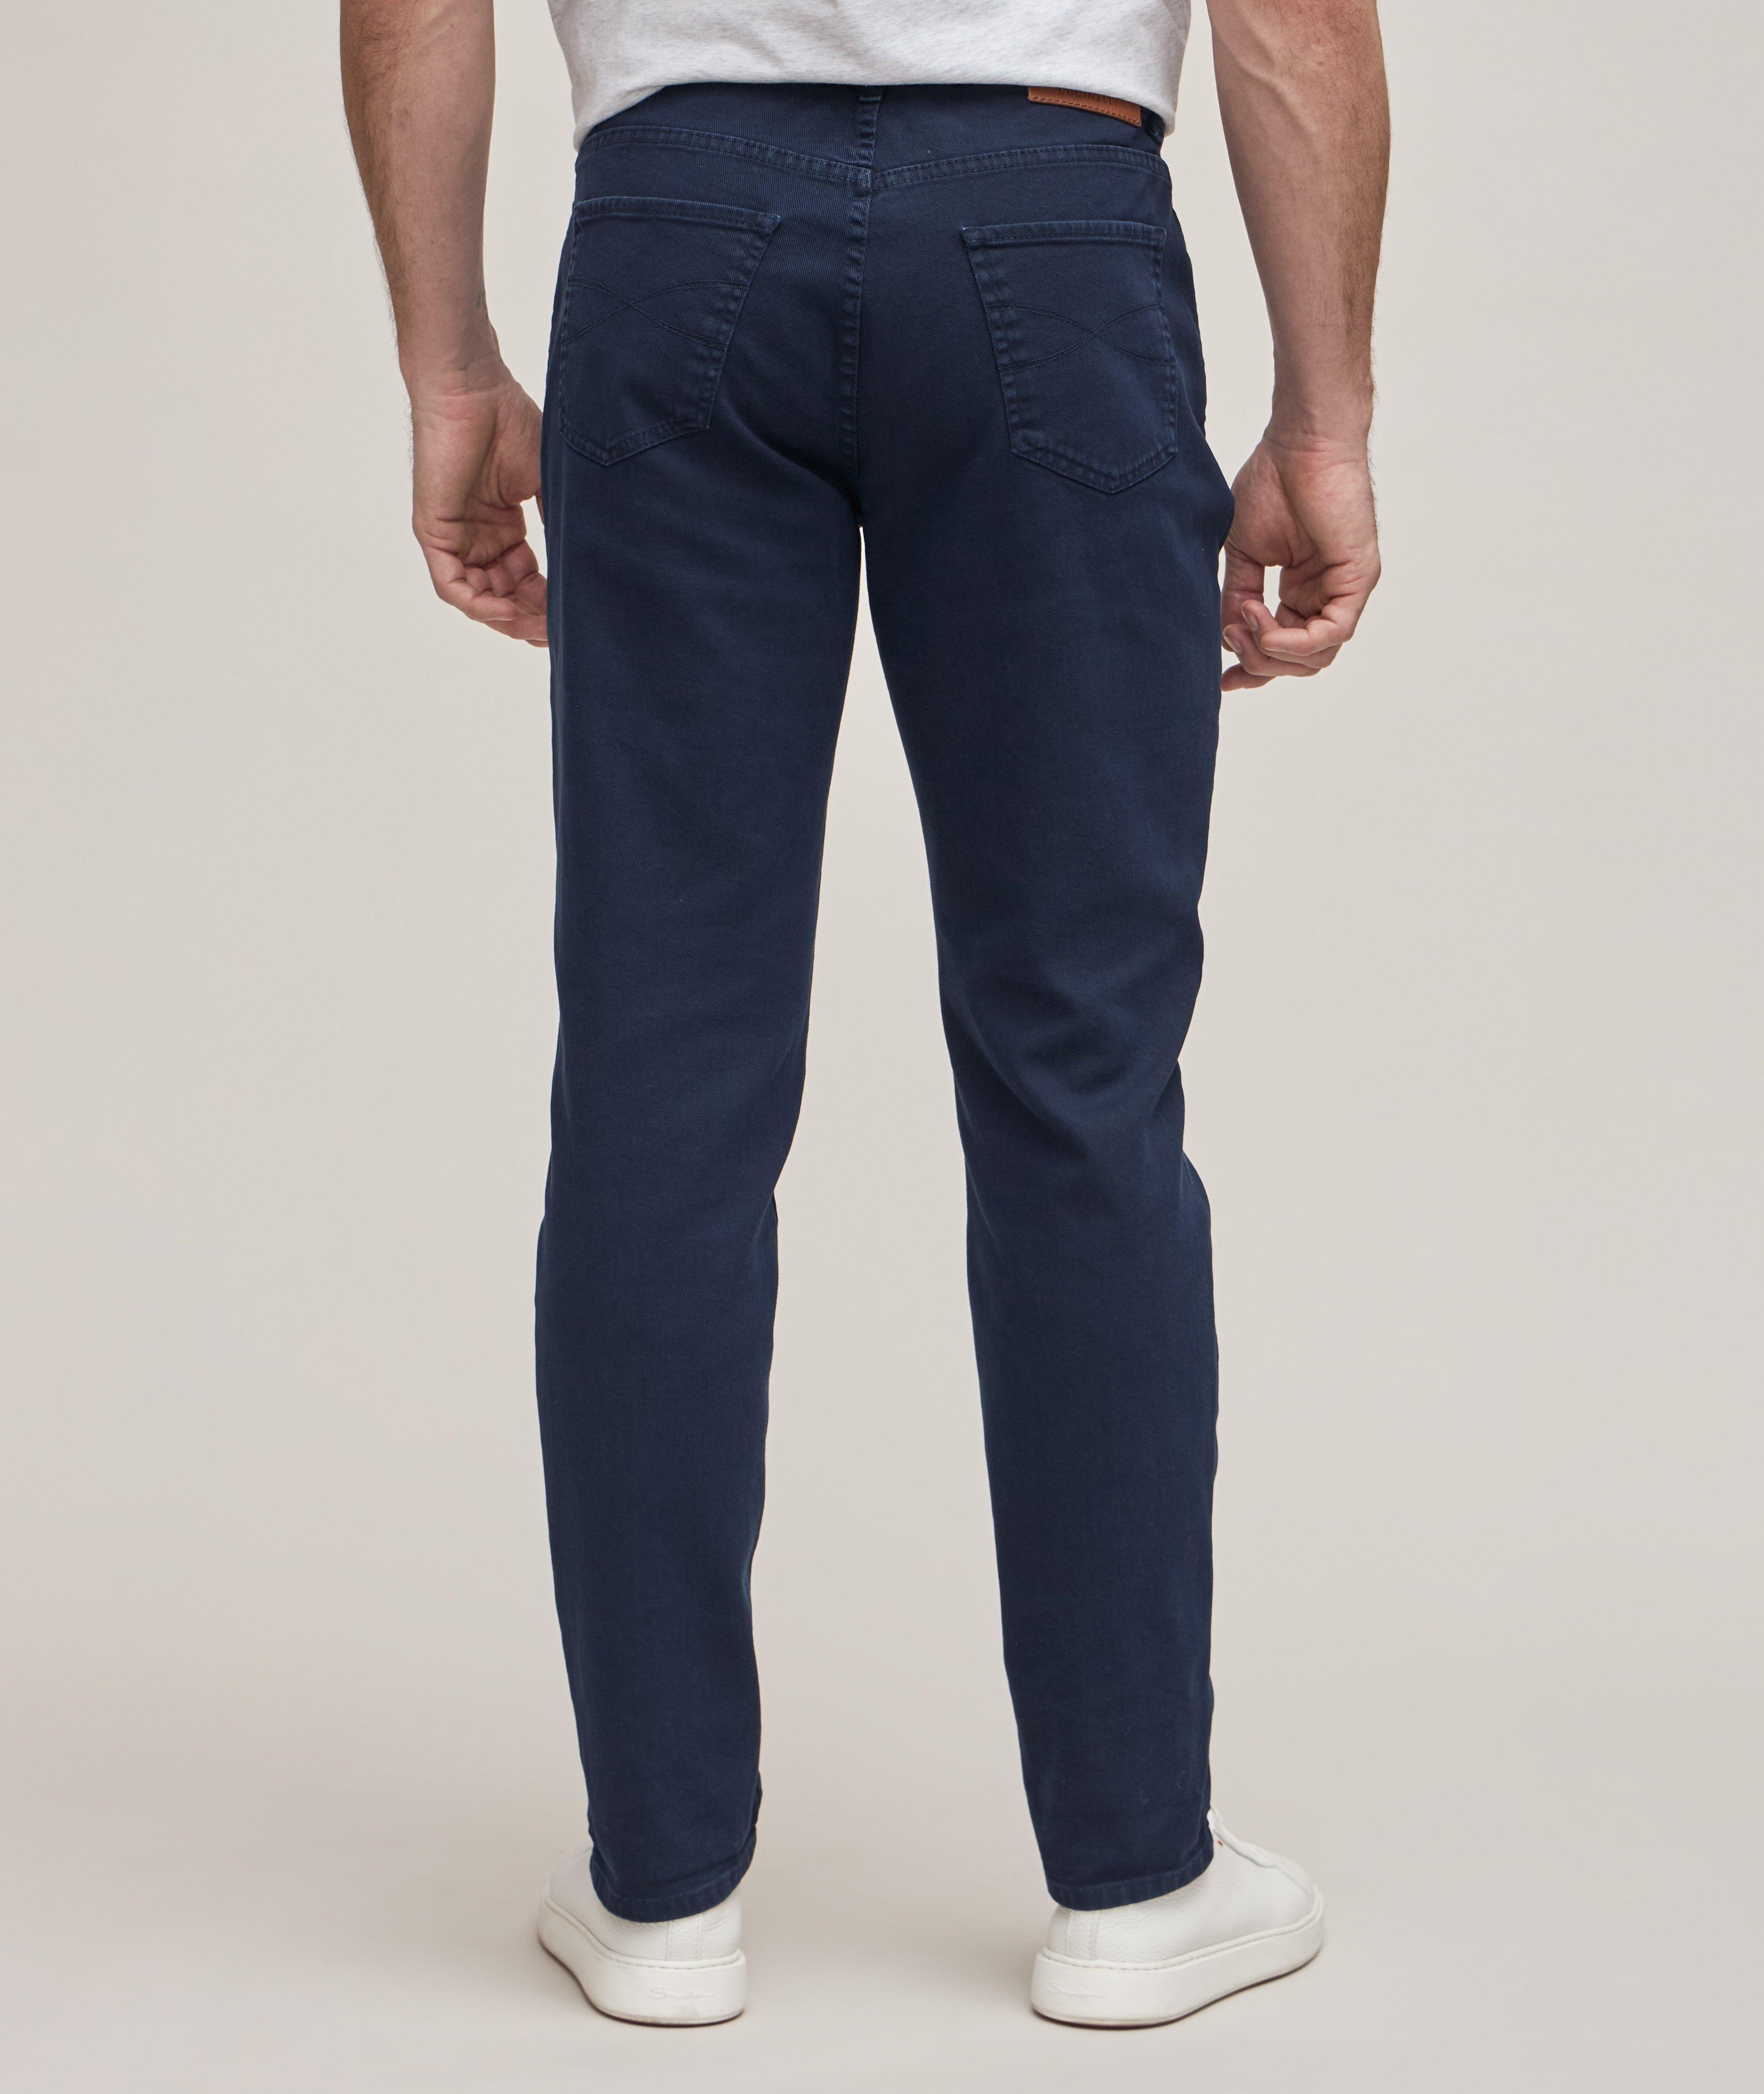 Overdyed Stretch-Cotton Jeans image 3